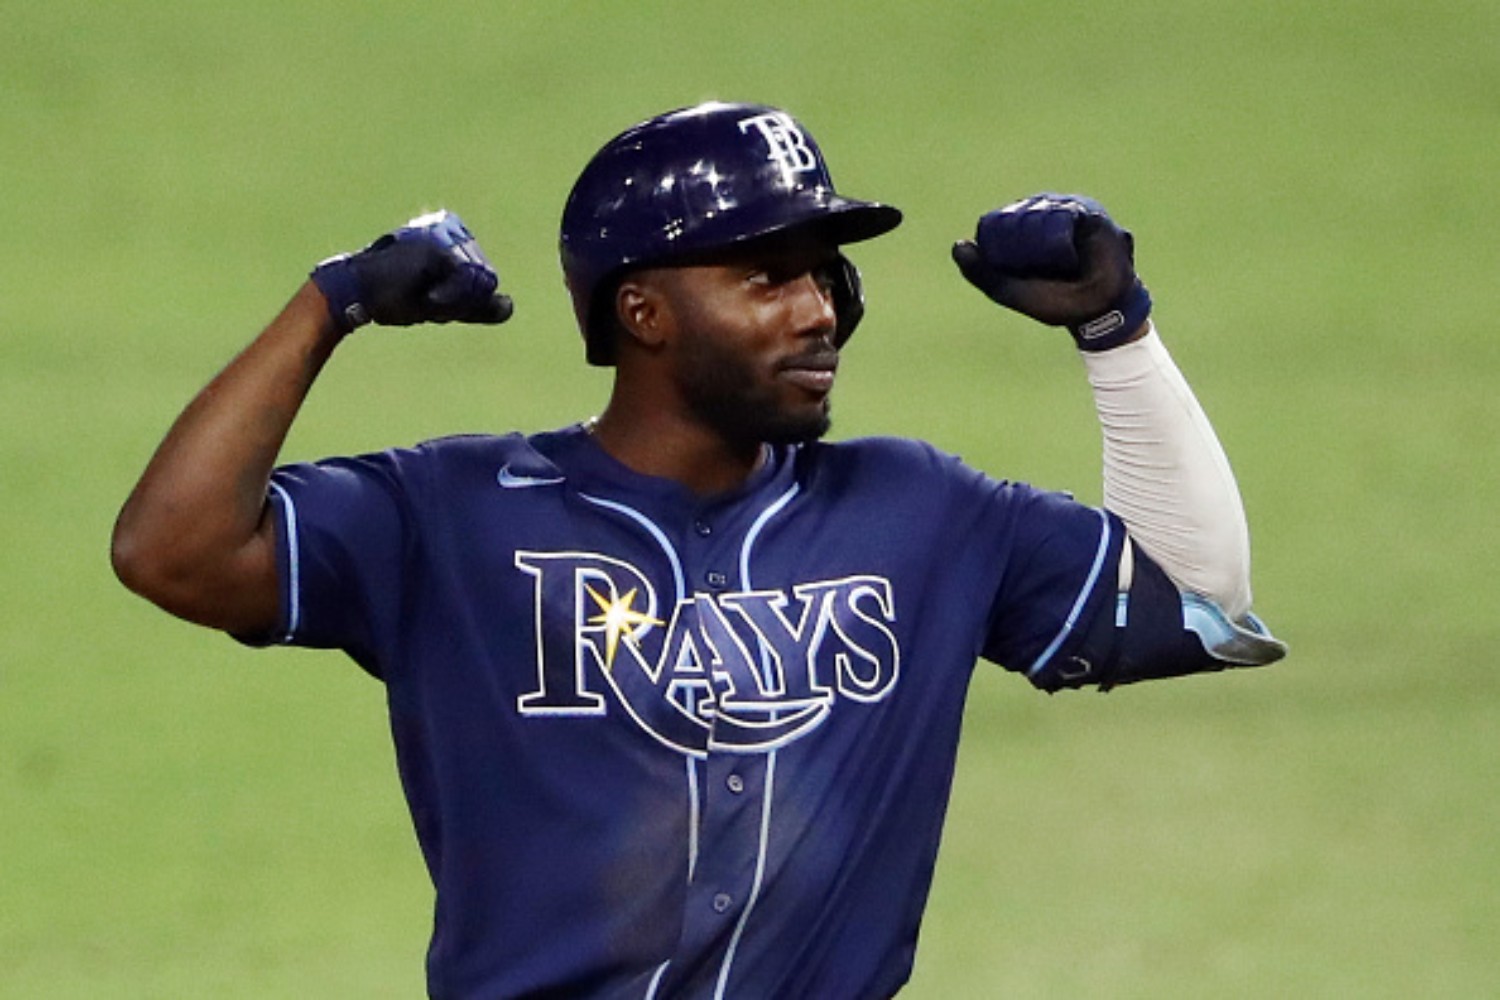 Tampa Bay Rays Rookie Randy Arozarena Had a Performance to Remember During the ALCS